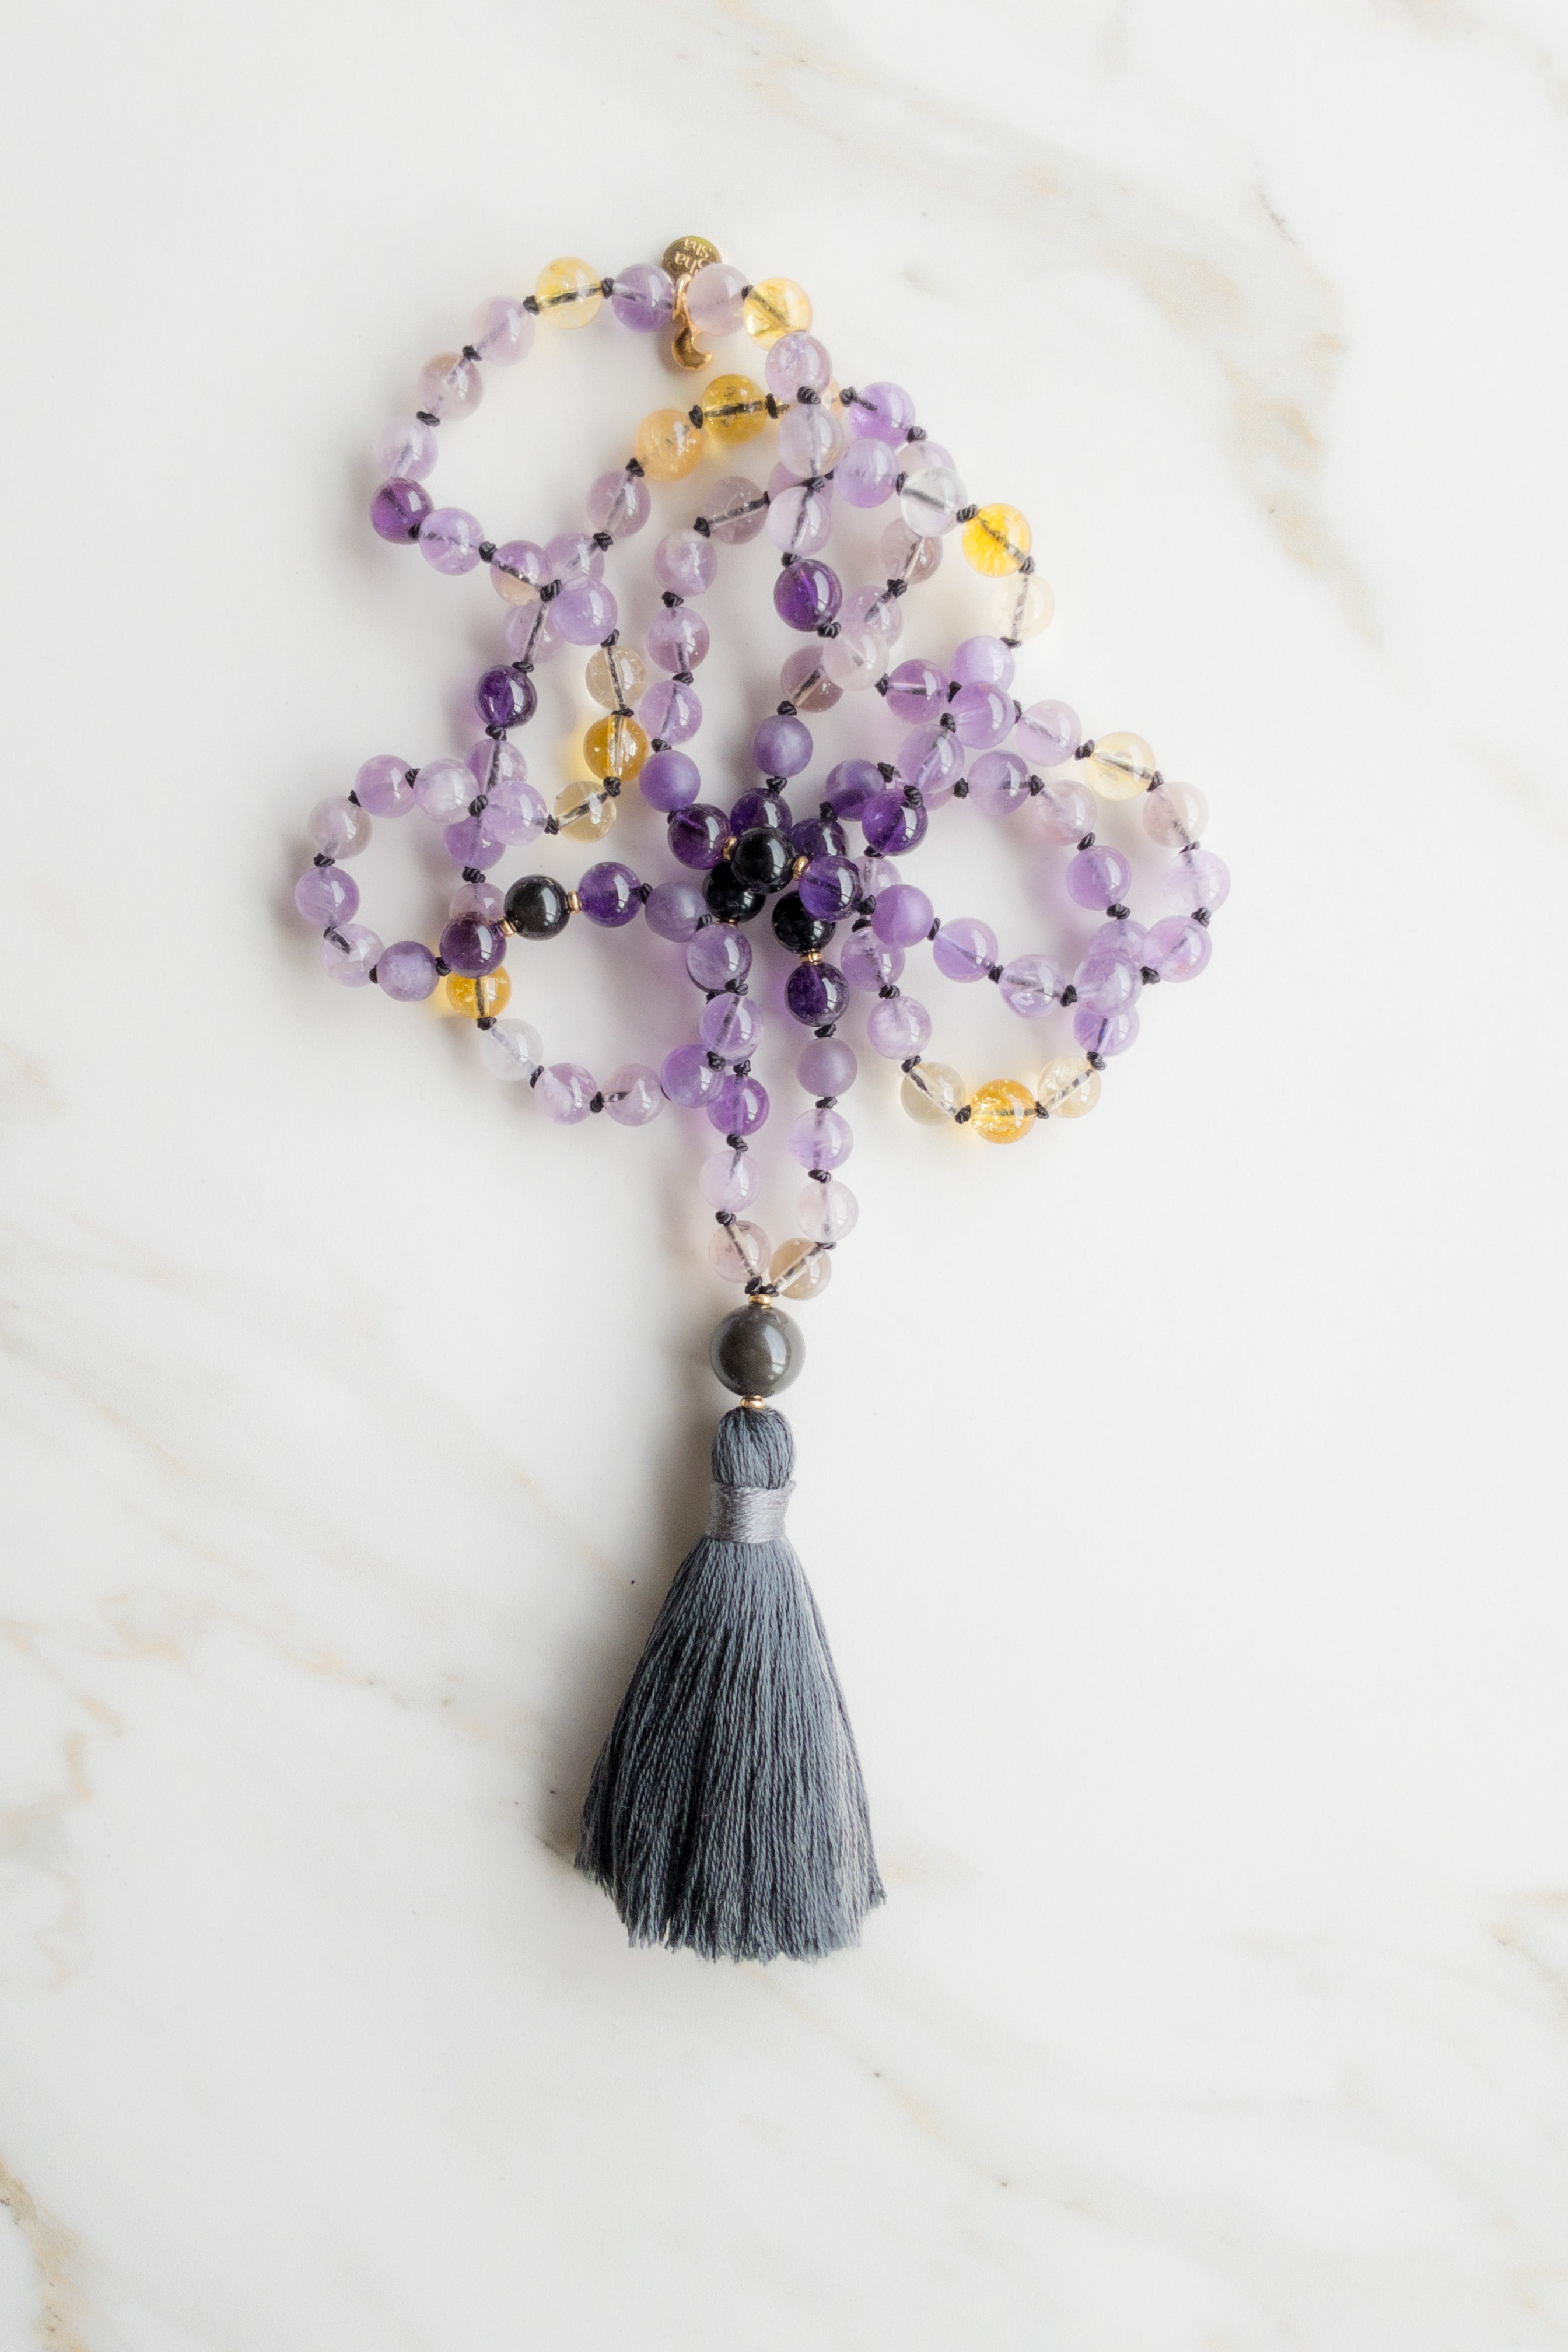 Astral Glow Mala 108 beads - Ametrine, Obsidian, Amethyst, Citrine - OceanEye - shashā jewellery Switzerland - handcrafted with love and intentions 